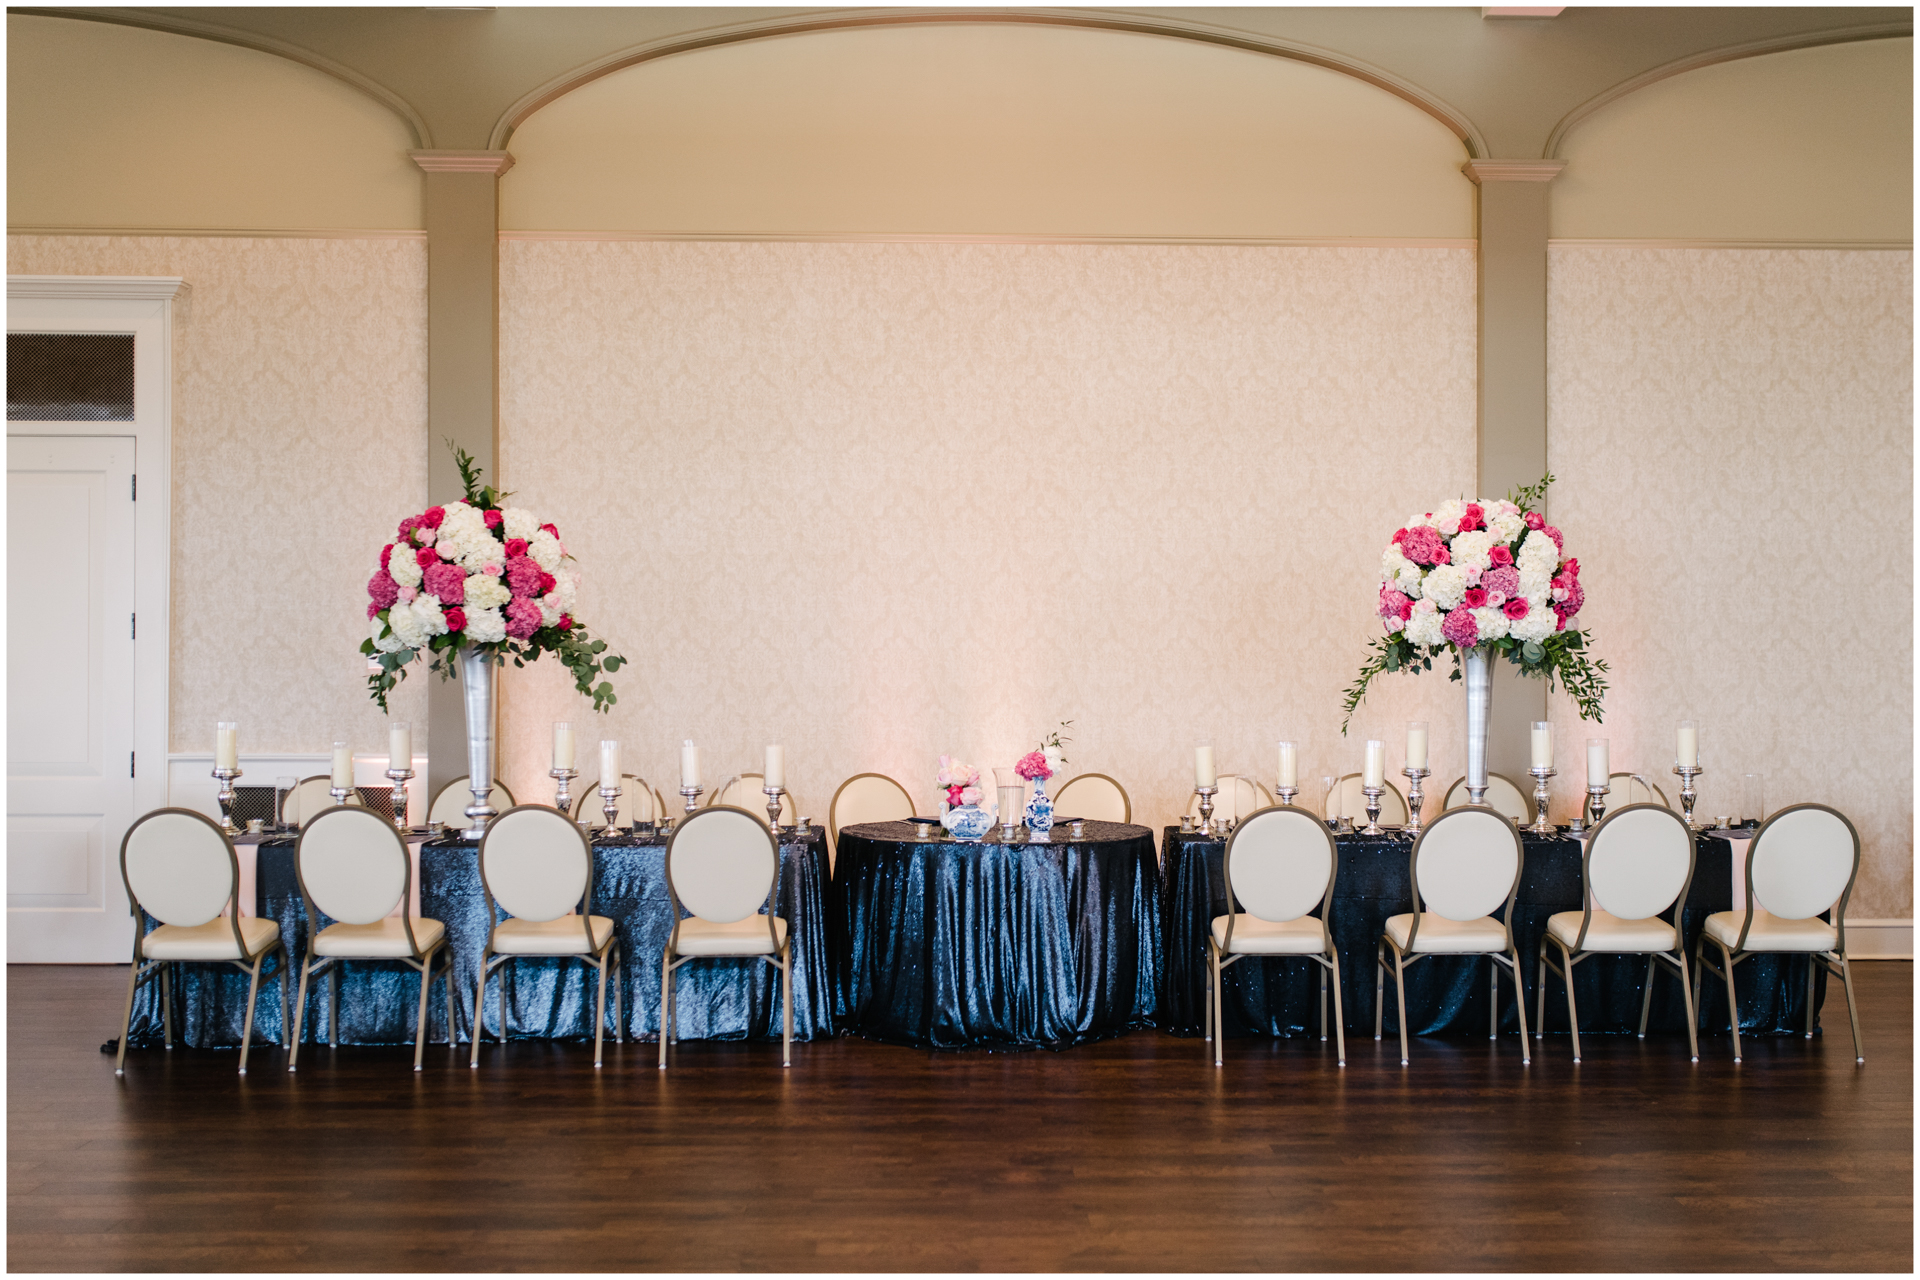 Blue sequence table cloth - pink and white floral centerpieces - bridal party table - baron bluff